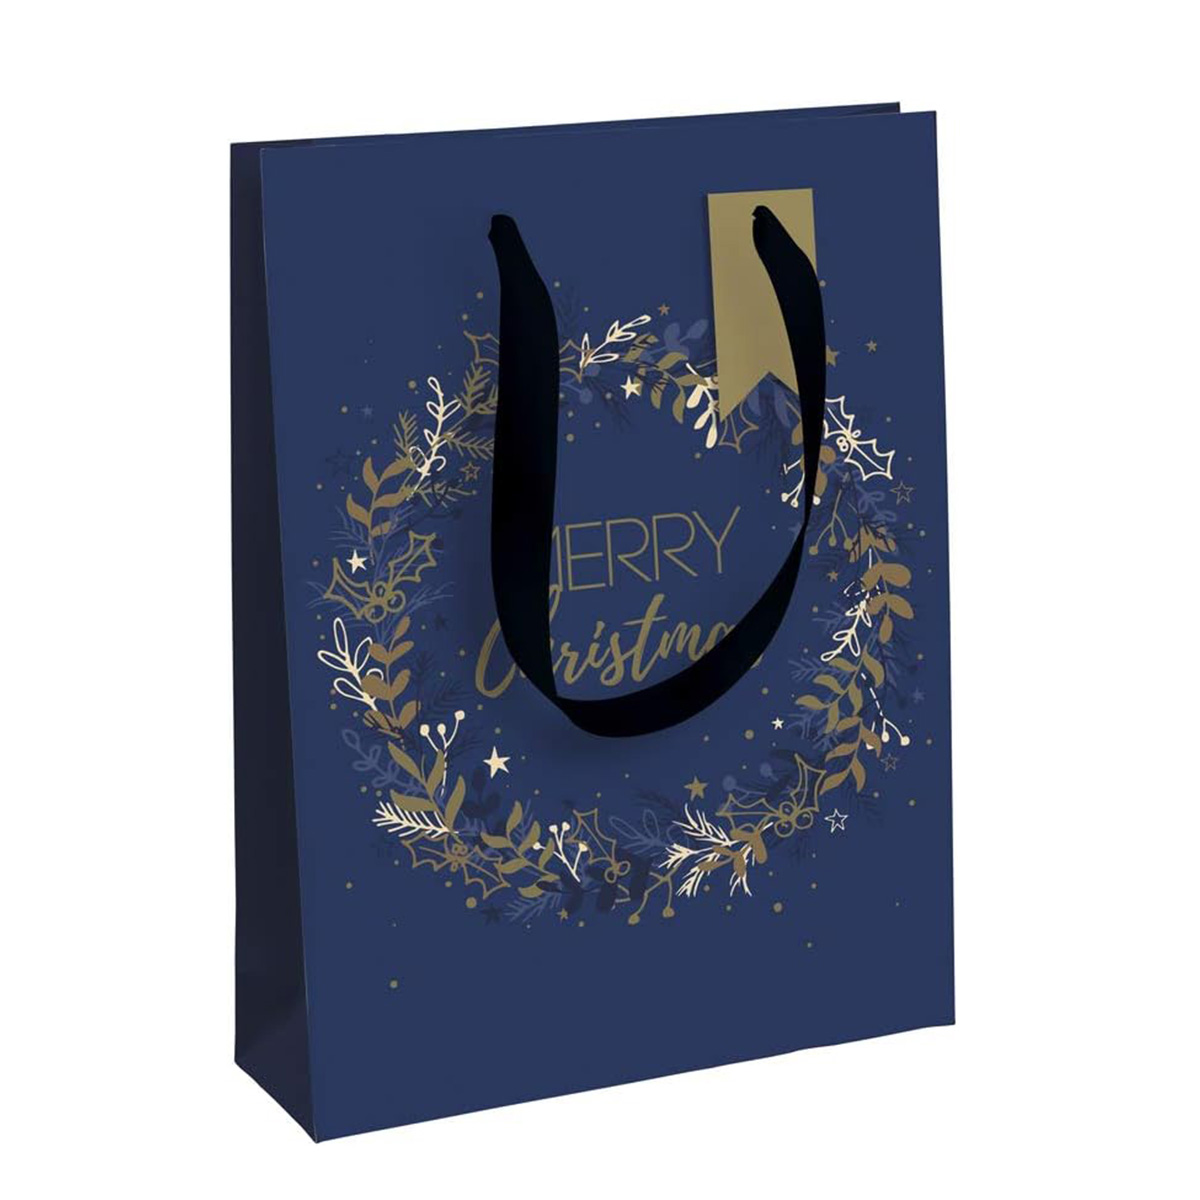 Clairefontaine gift bag with satin ribbon 33 x 26.5 x 14 cm - Christmas starry night